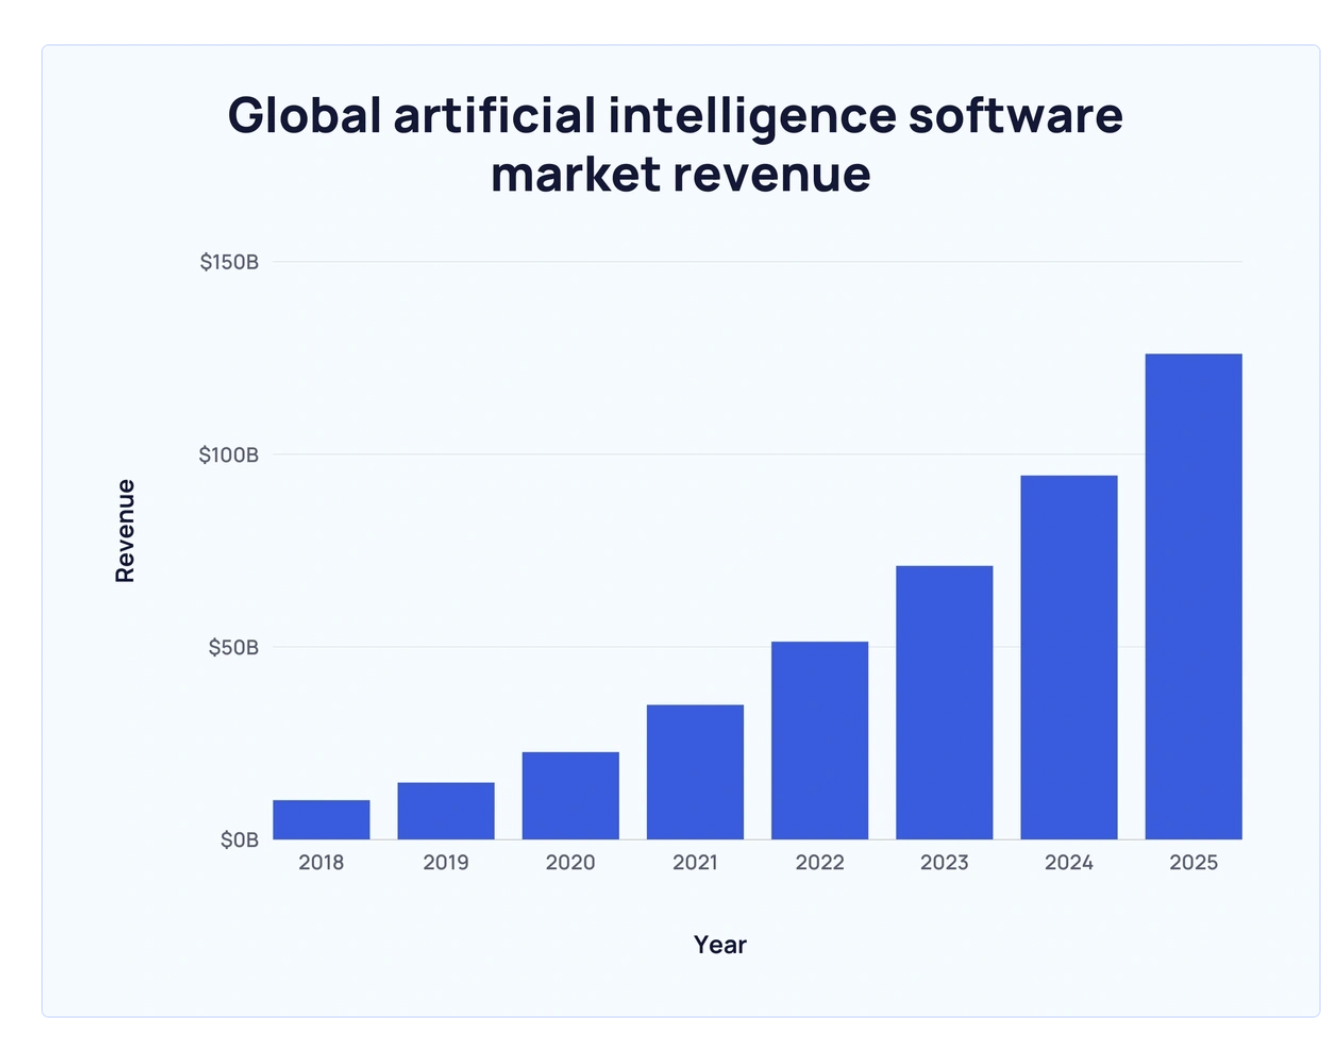 Graph showing revenue projections for AI software